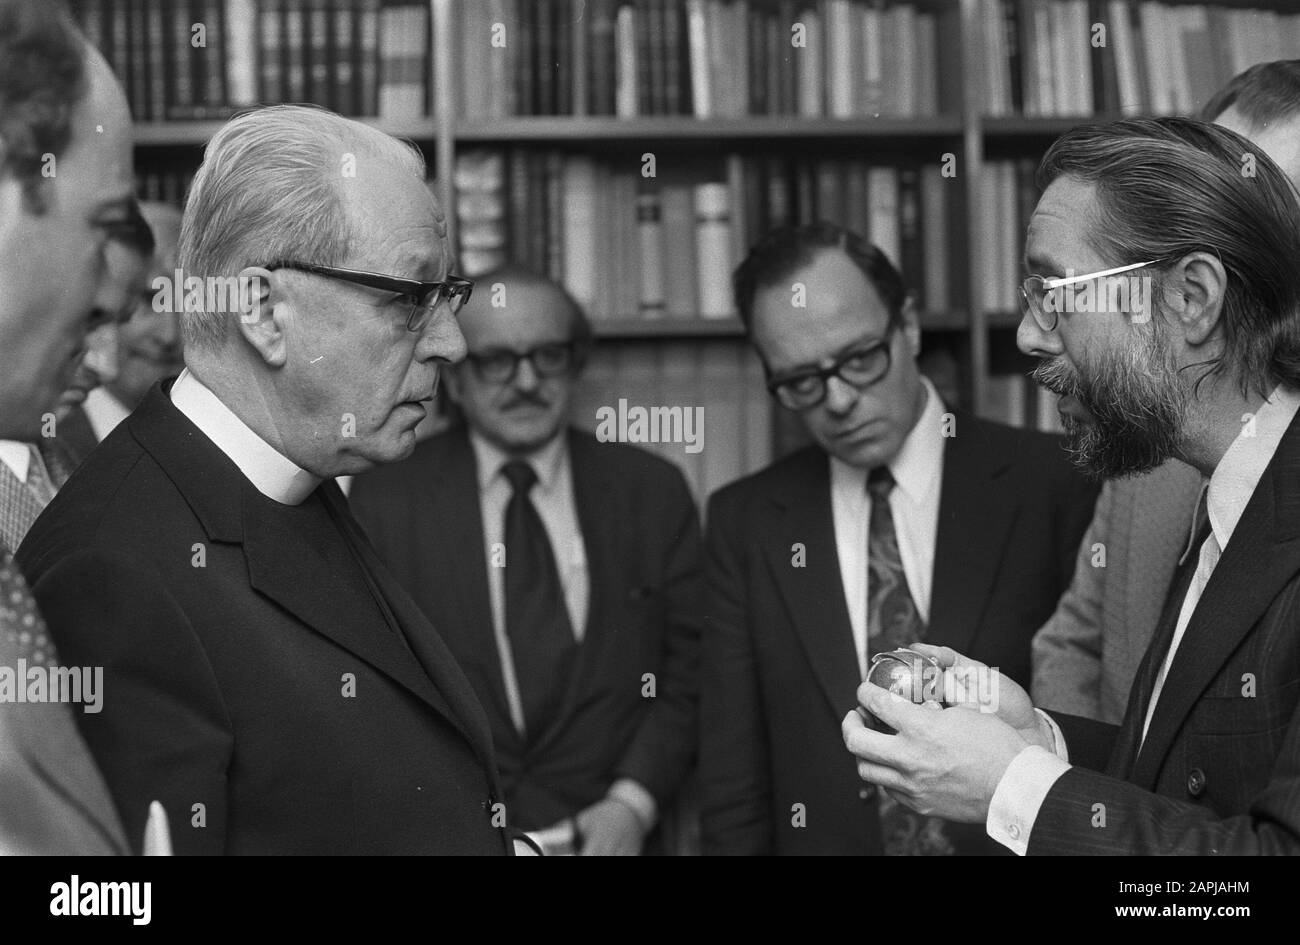 Delegation of American Council of Churches speaks with Cardinal Alfrink in Rotterdam about Vietnam, Harvey Cox (r) shows fragmentation bomb to Cardinal Alfrink (r) Date: January 9, 1973 Location: Rotterdam, Zuid-Holland Keywords: discussions, delegations, cardinals Personal name: Alfrink, Bernardus Institution name: Council of Churches in the Netherlands Stock Photo